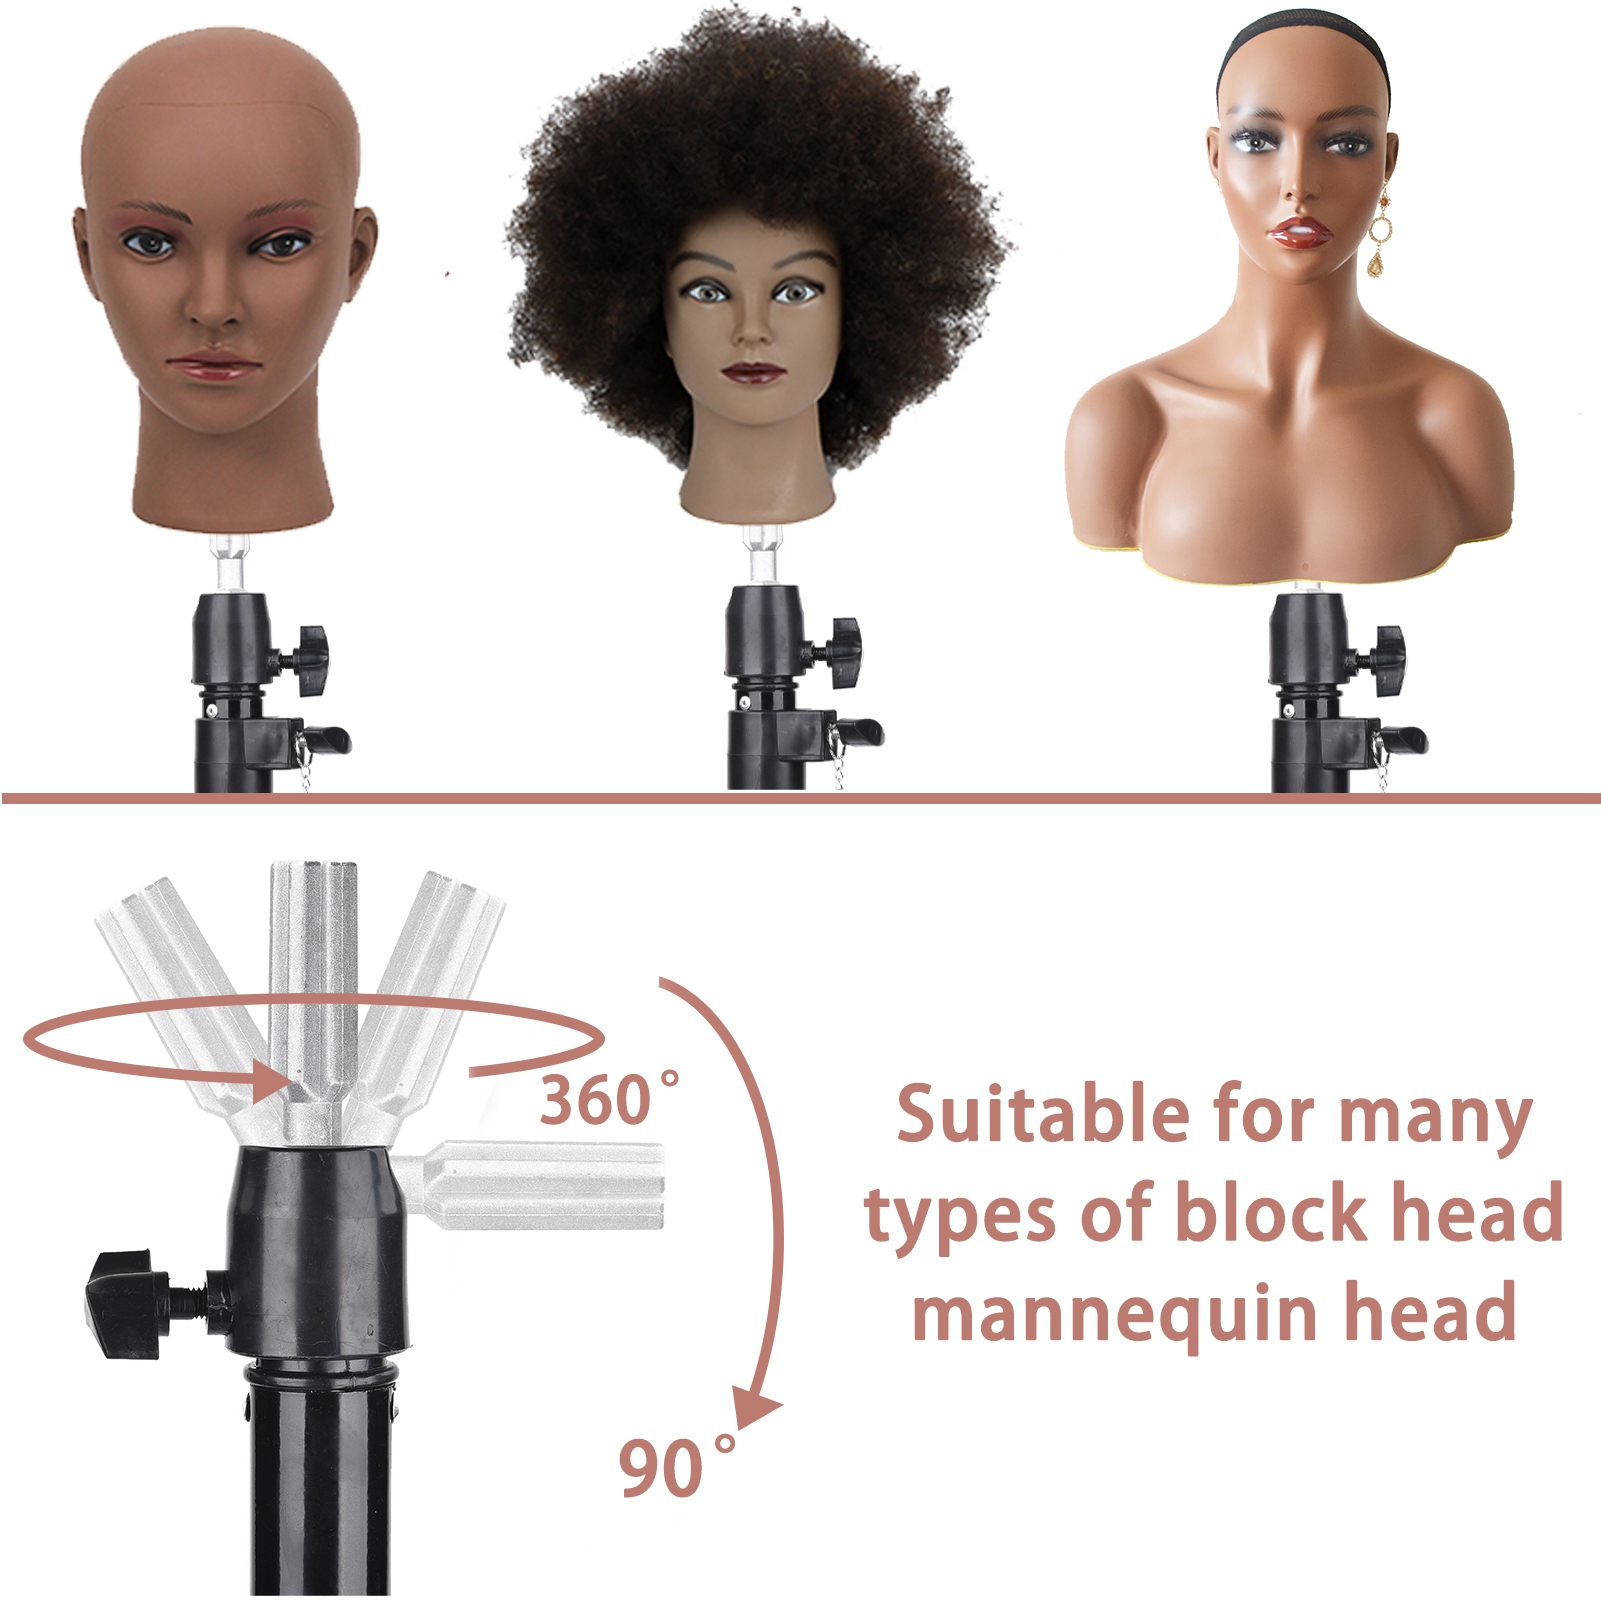  MEIBR Mannequin Head Stand Adjustable Wig Stand Tripod for  Hairdressing Training,Cosmetology Mannequin Training Professional Metal  Support Tripod (Black) : Beauty & Personal Care